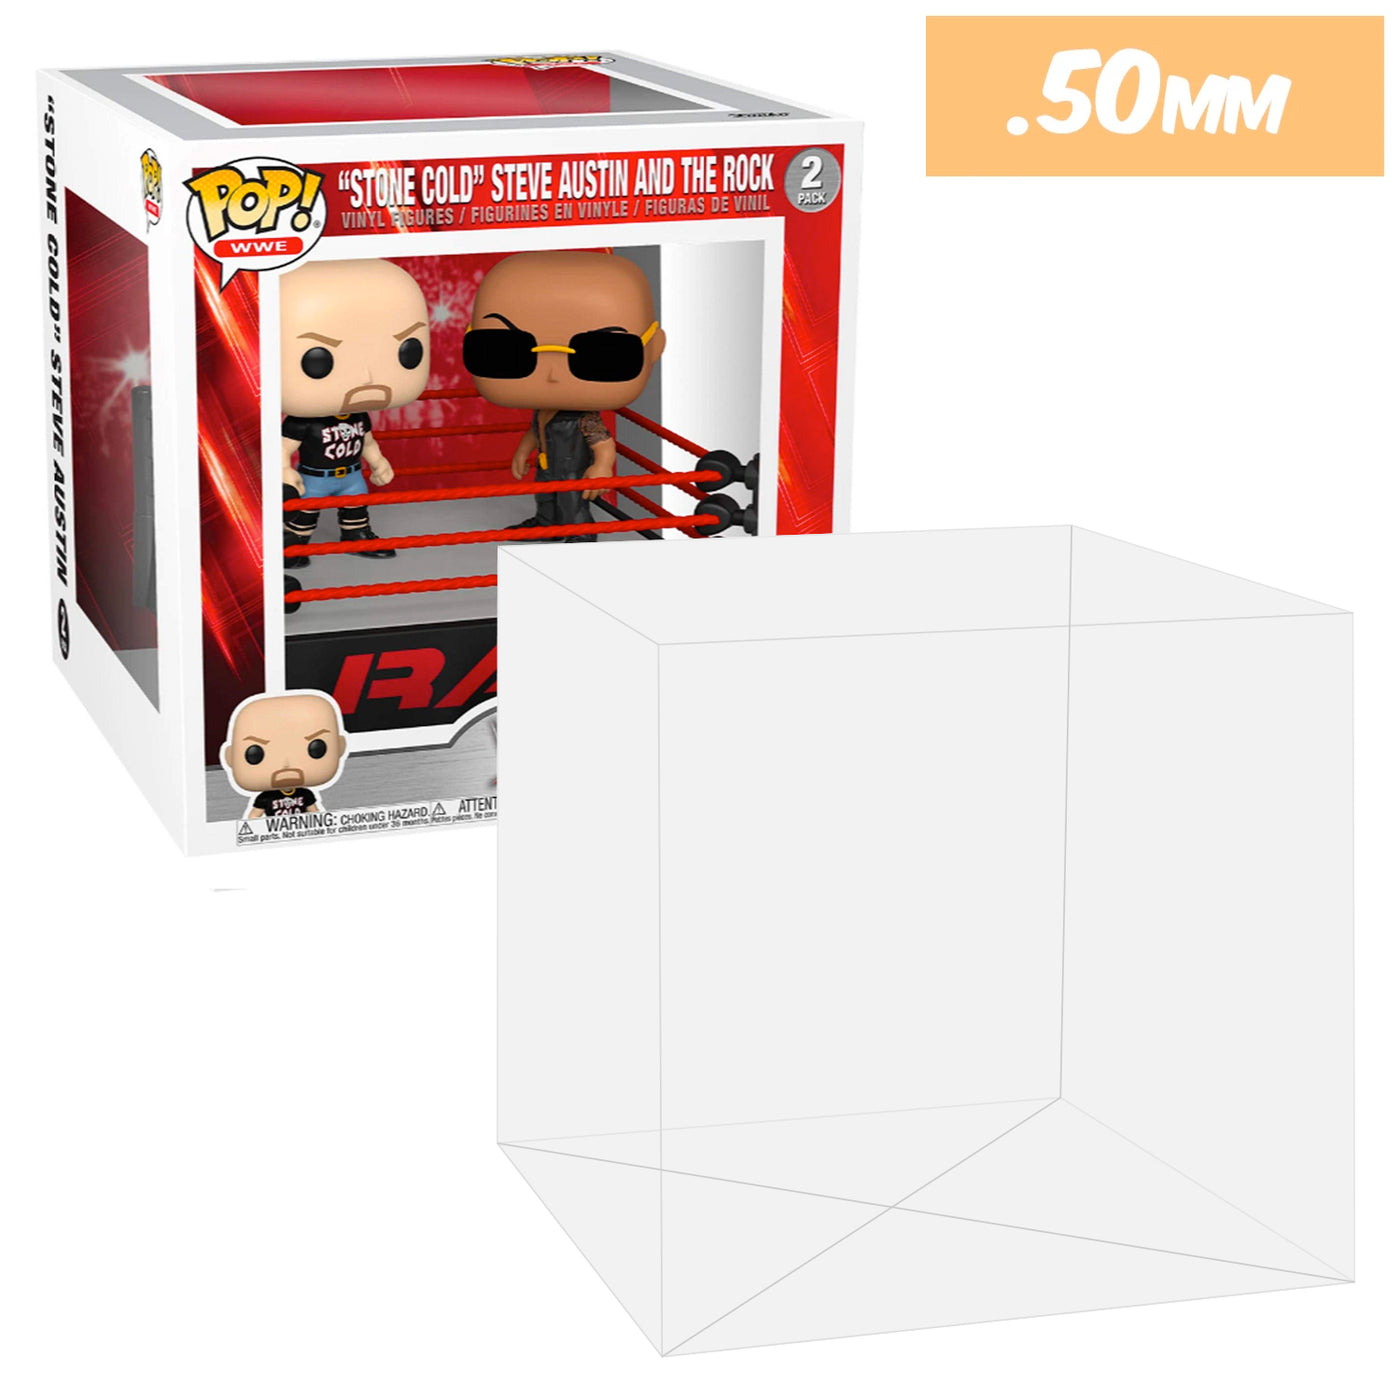 wwe wrestling ring stone cold the rock pop deluxe 2 pack best funko pop protectors thick strong uv scratch flat top stack vinyl display geek plastic shield vaulted eco armor fits collect protect display case kollector protector